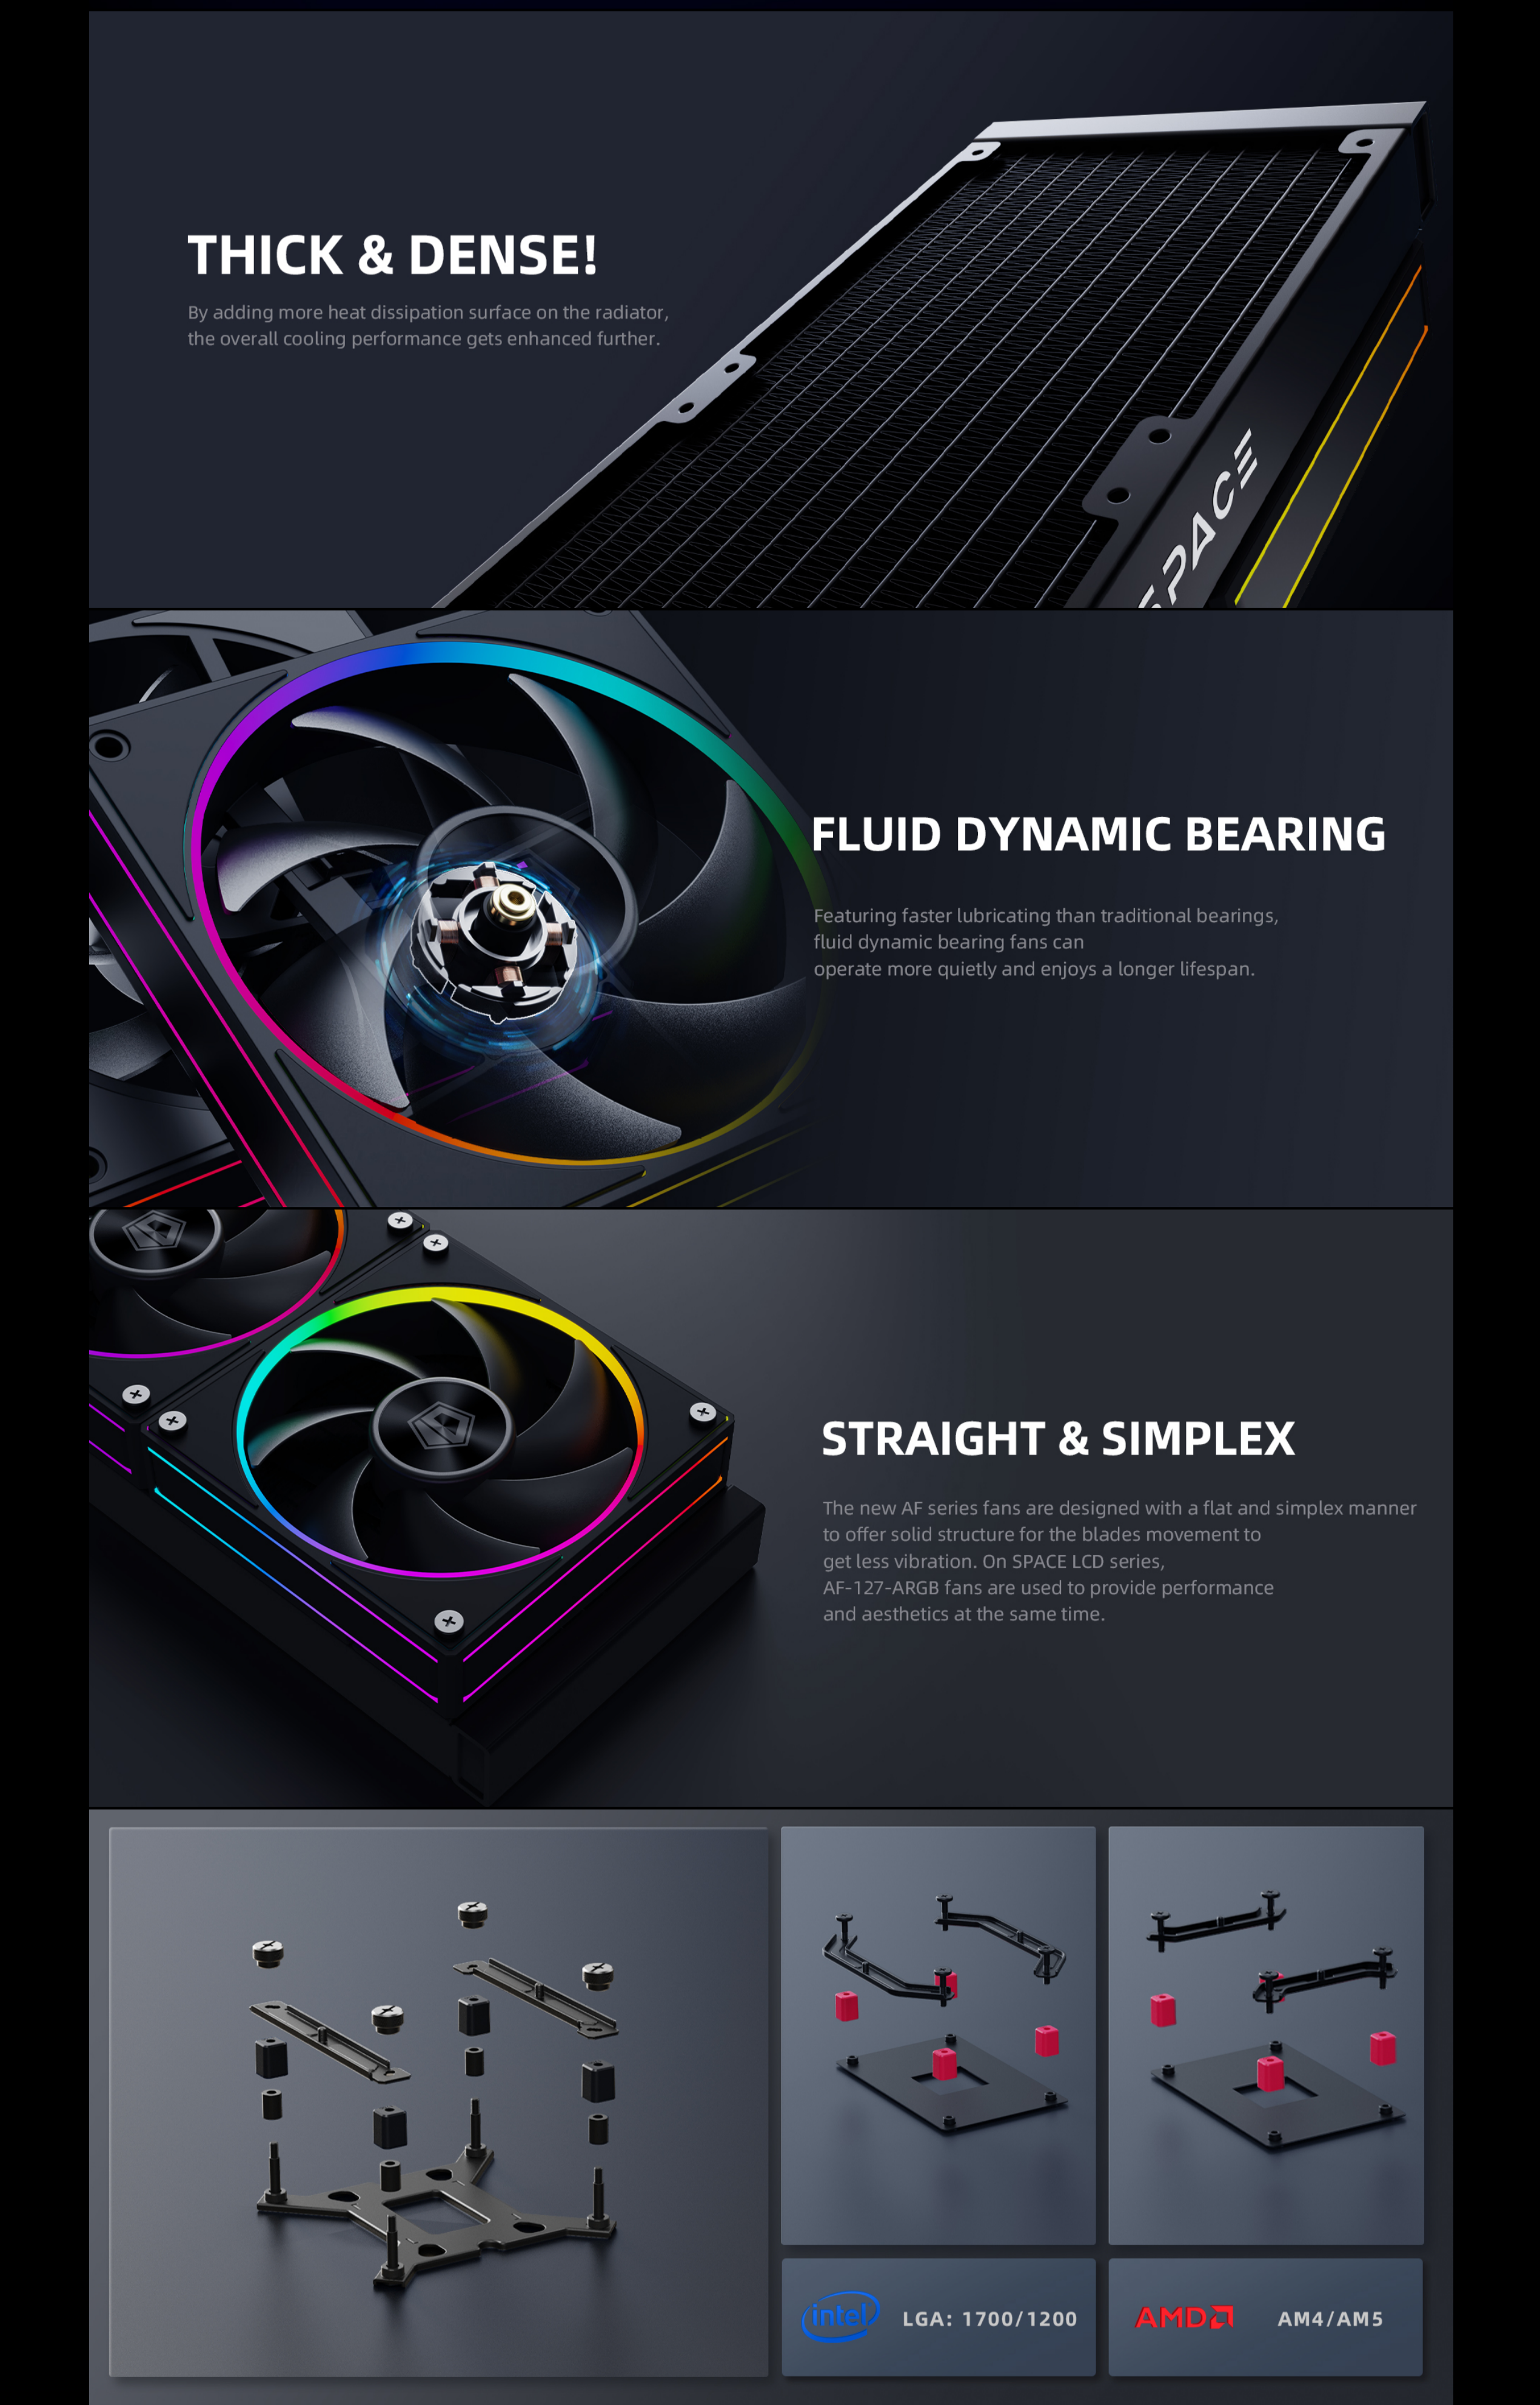 A large marketing image providing additional information about the product ID-COOLING Space LCD 360mm AIO CPU Liquid Cooler - Black - Additional alt info not provided